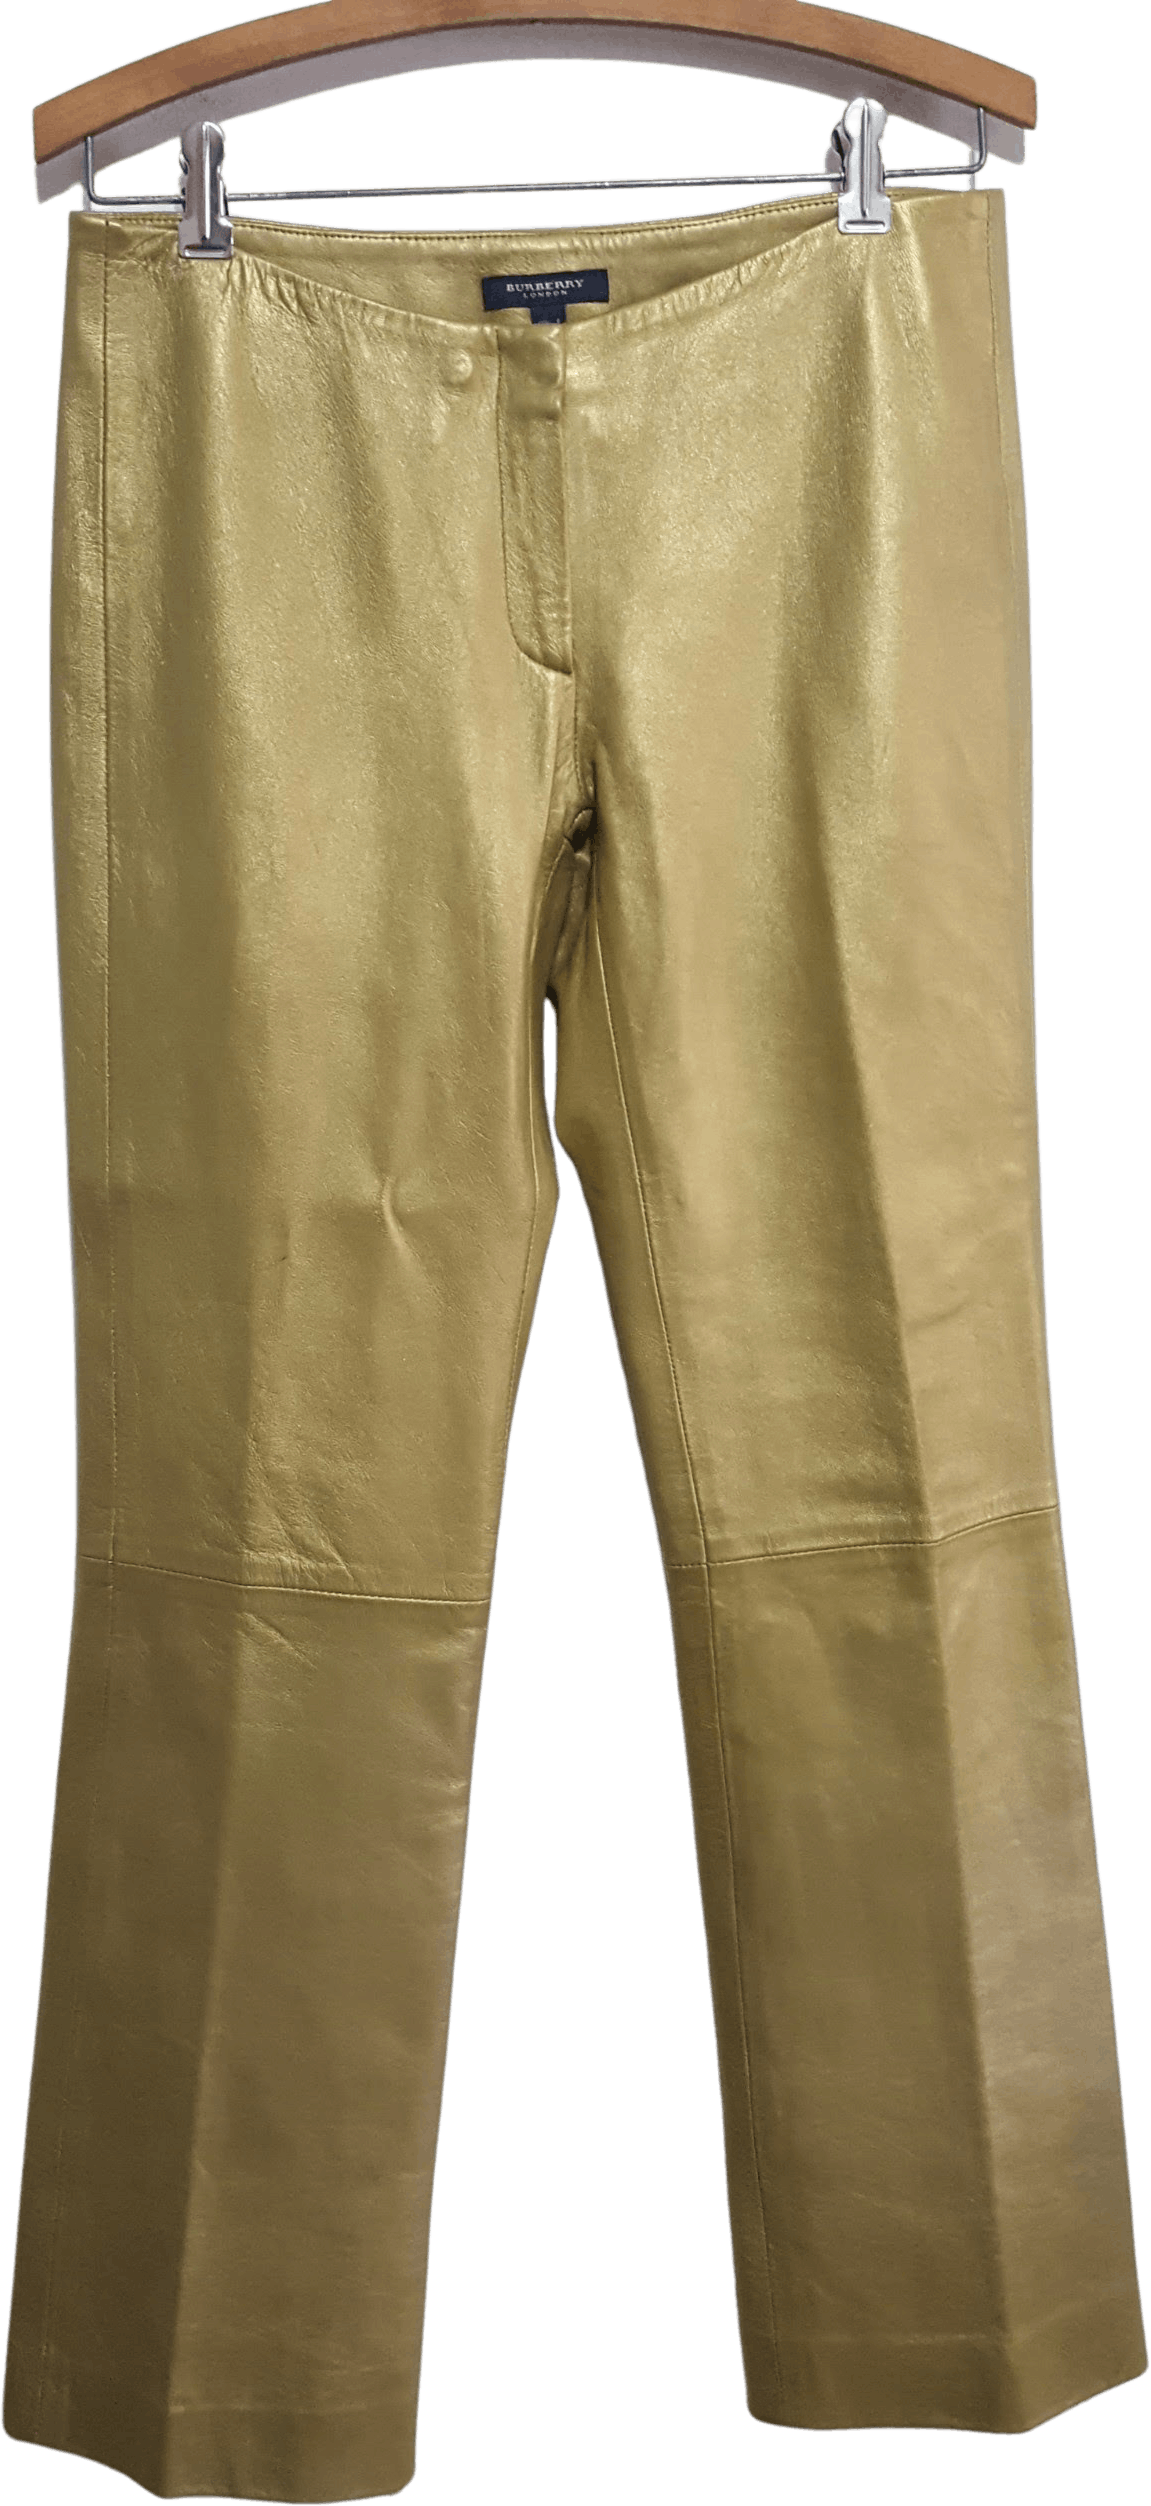 Vintage 00's Metallic Gold Leather Pants by Burberry - Free Shipping ...